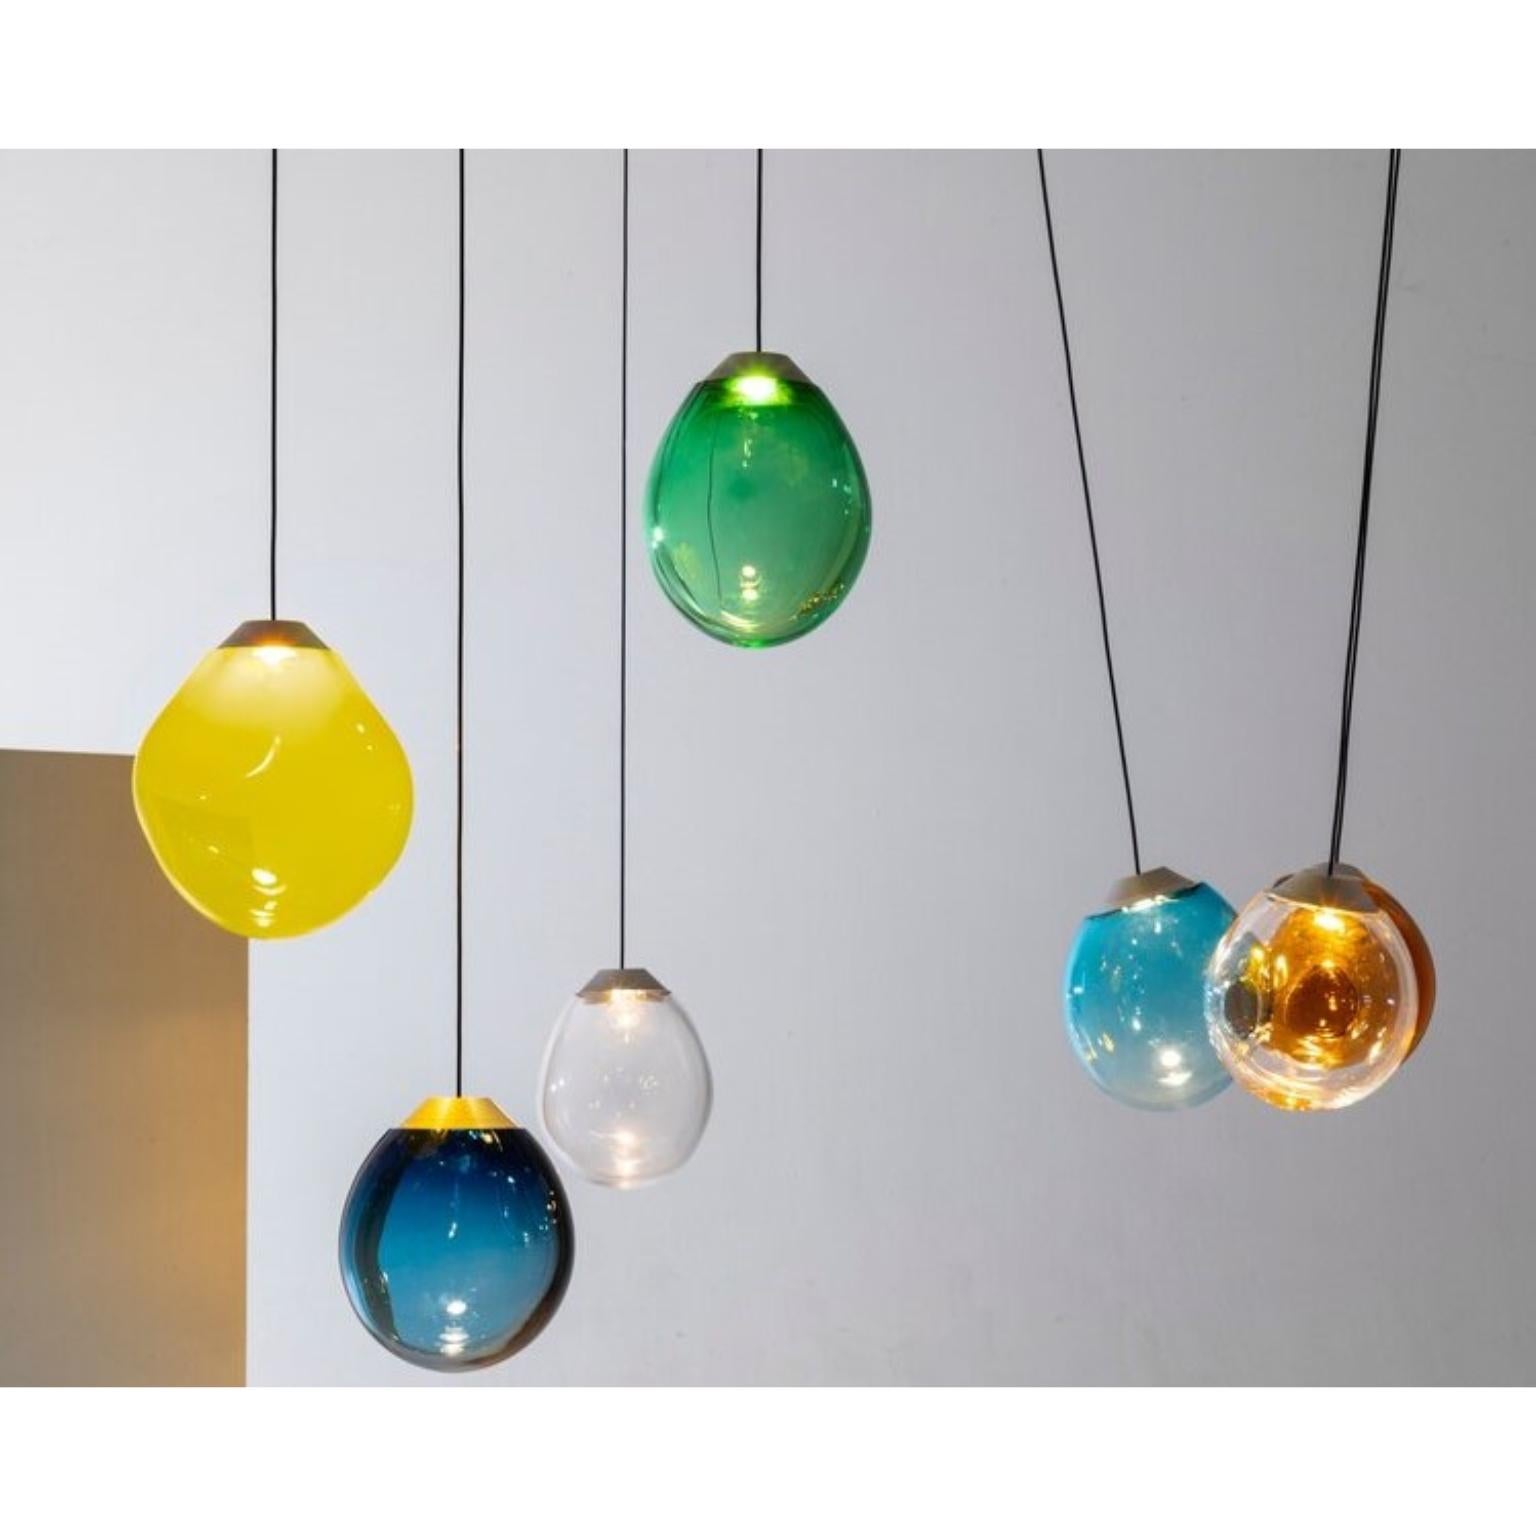 Colored single momentum blown glass pendants by Alex de Witte
Dimensions: 20 -25 cm
Materials: Mouth Blown Glass

With the Momentum Alex de Witte has found the prefect artistic defining moment while playing with the boundaries of glass blowing